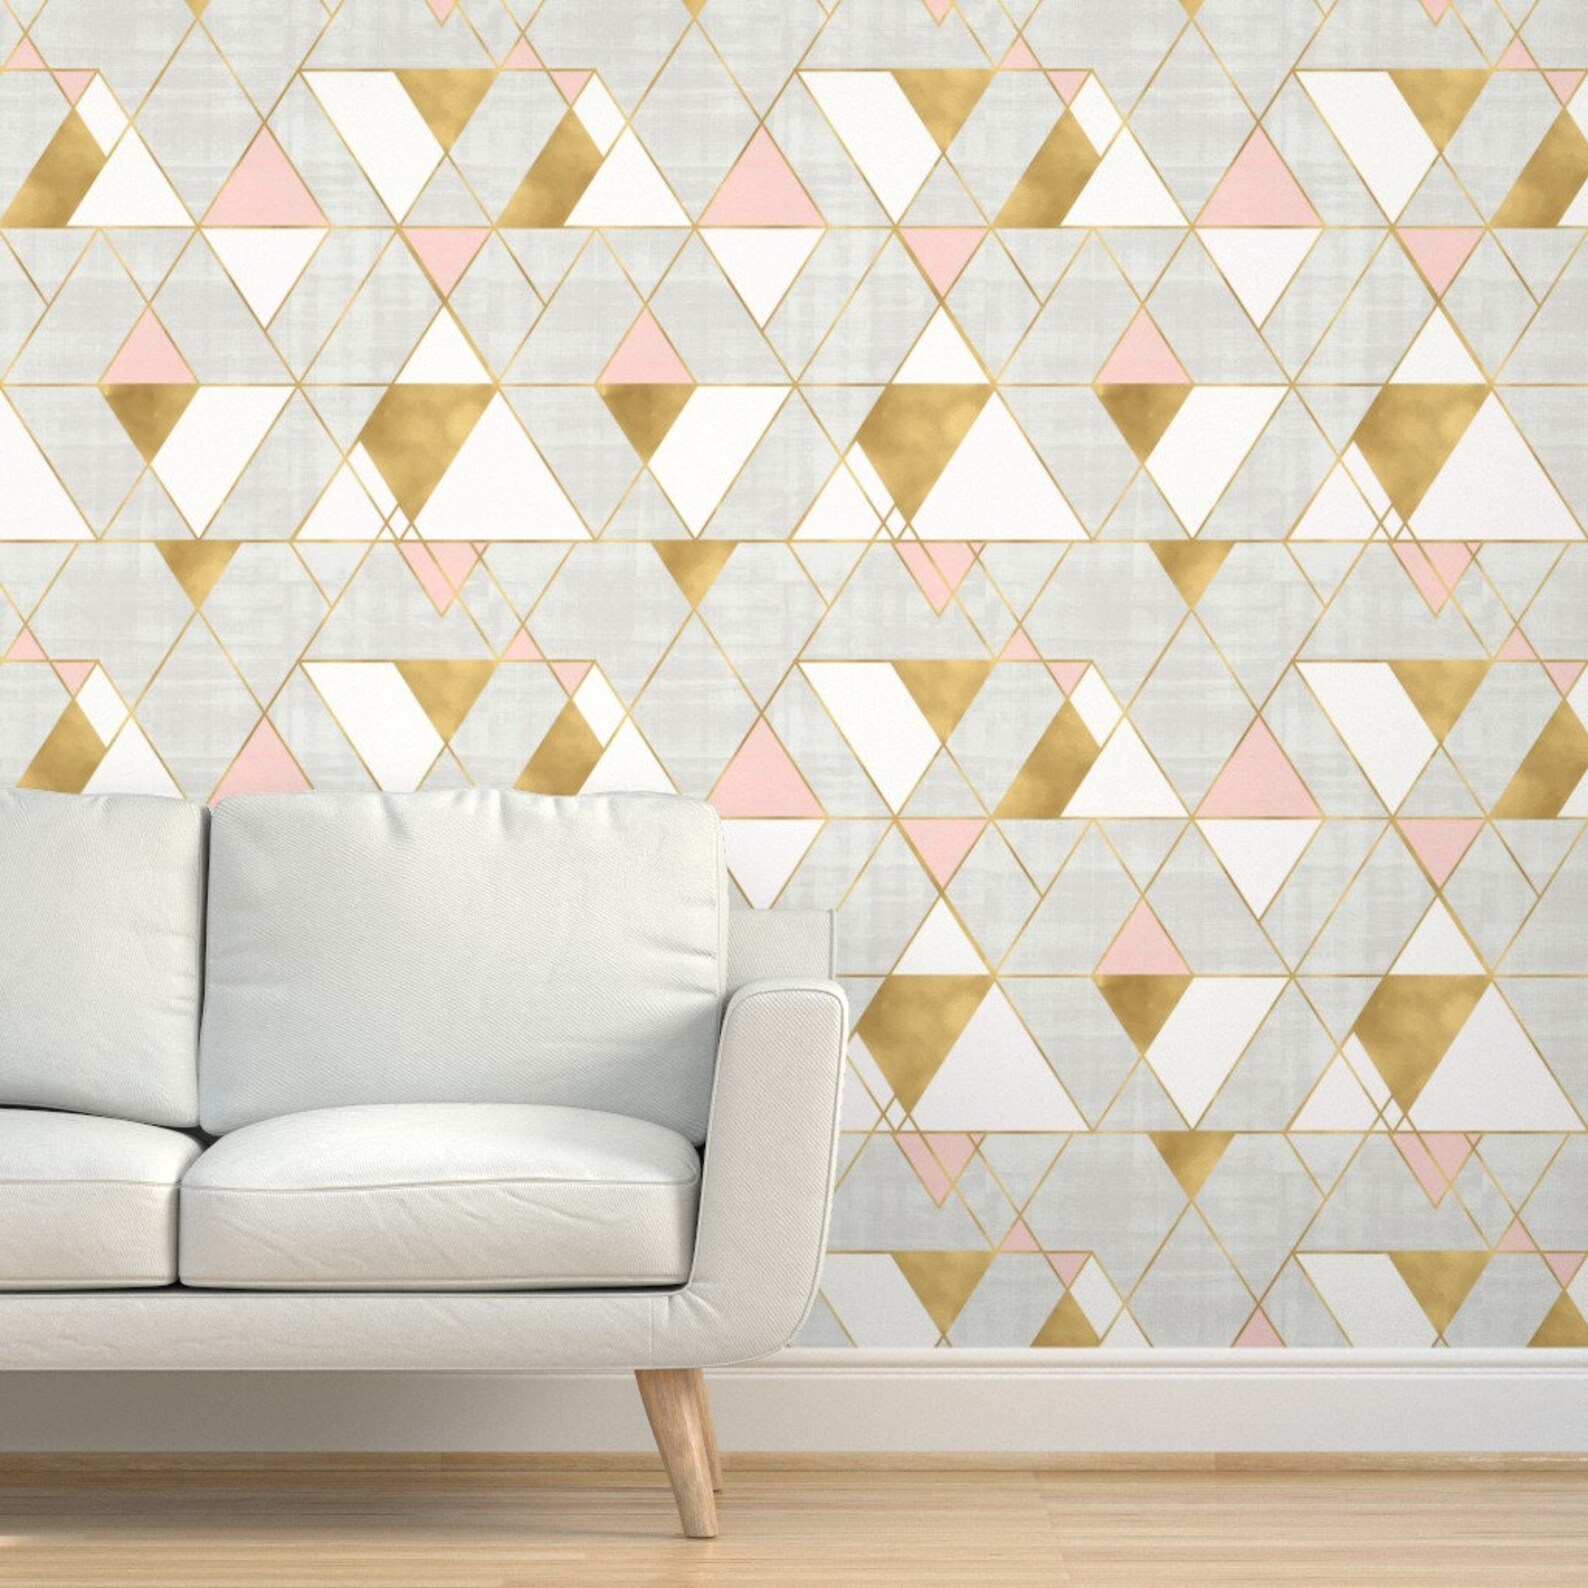 Triangles Wallpaper Mod-triangles Gray-gold-blush by Crystal | Etsy